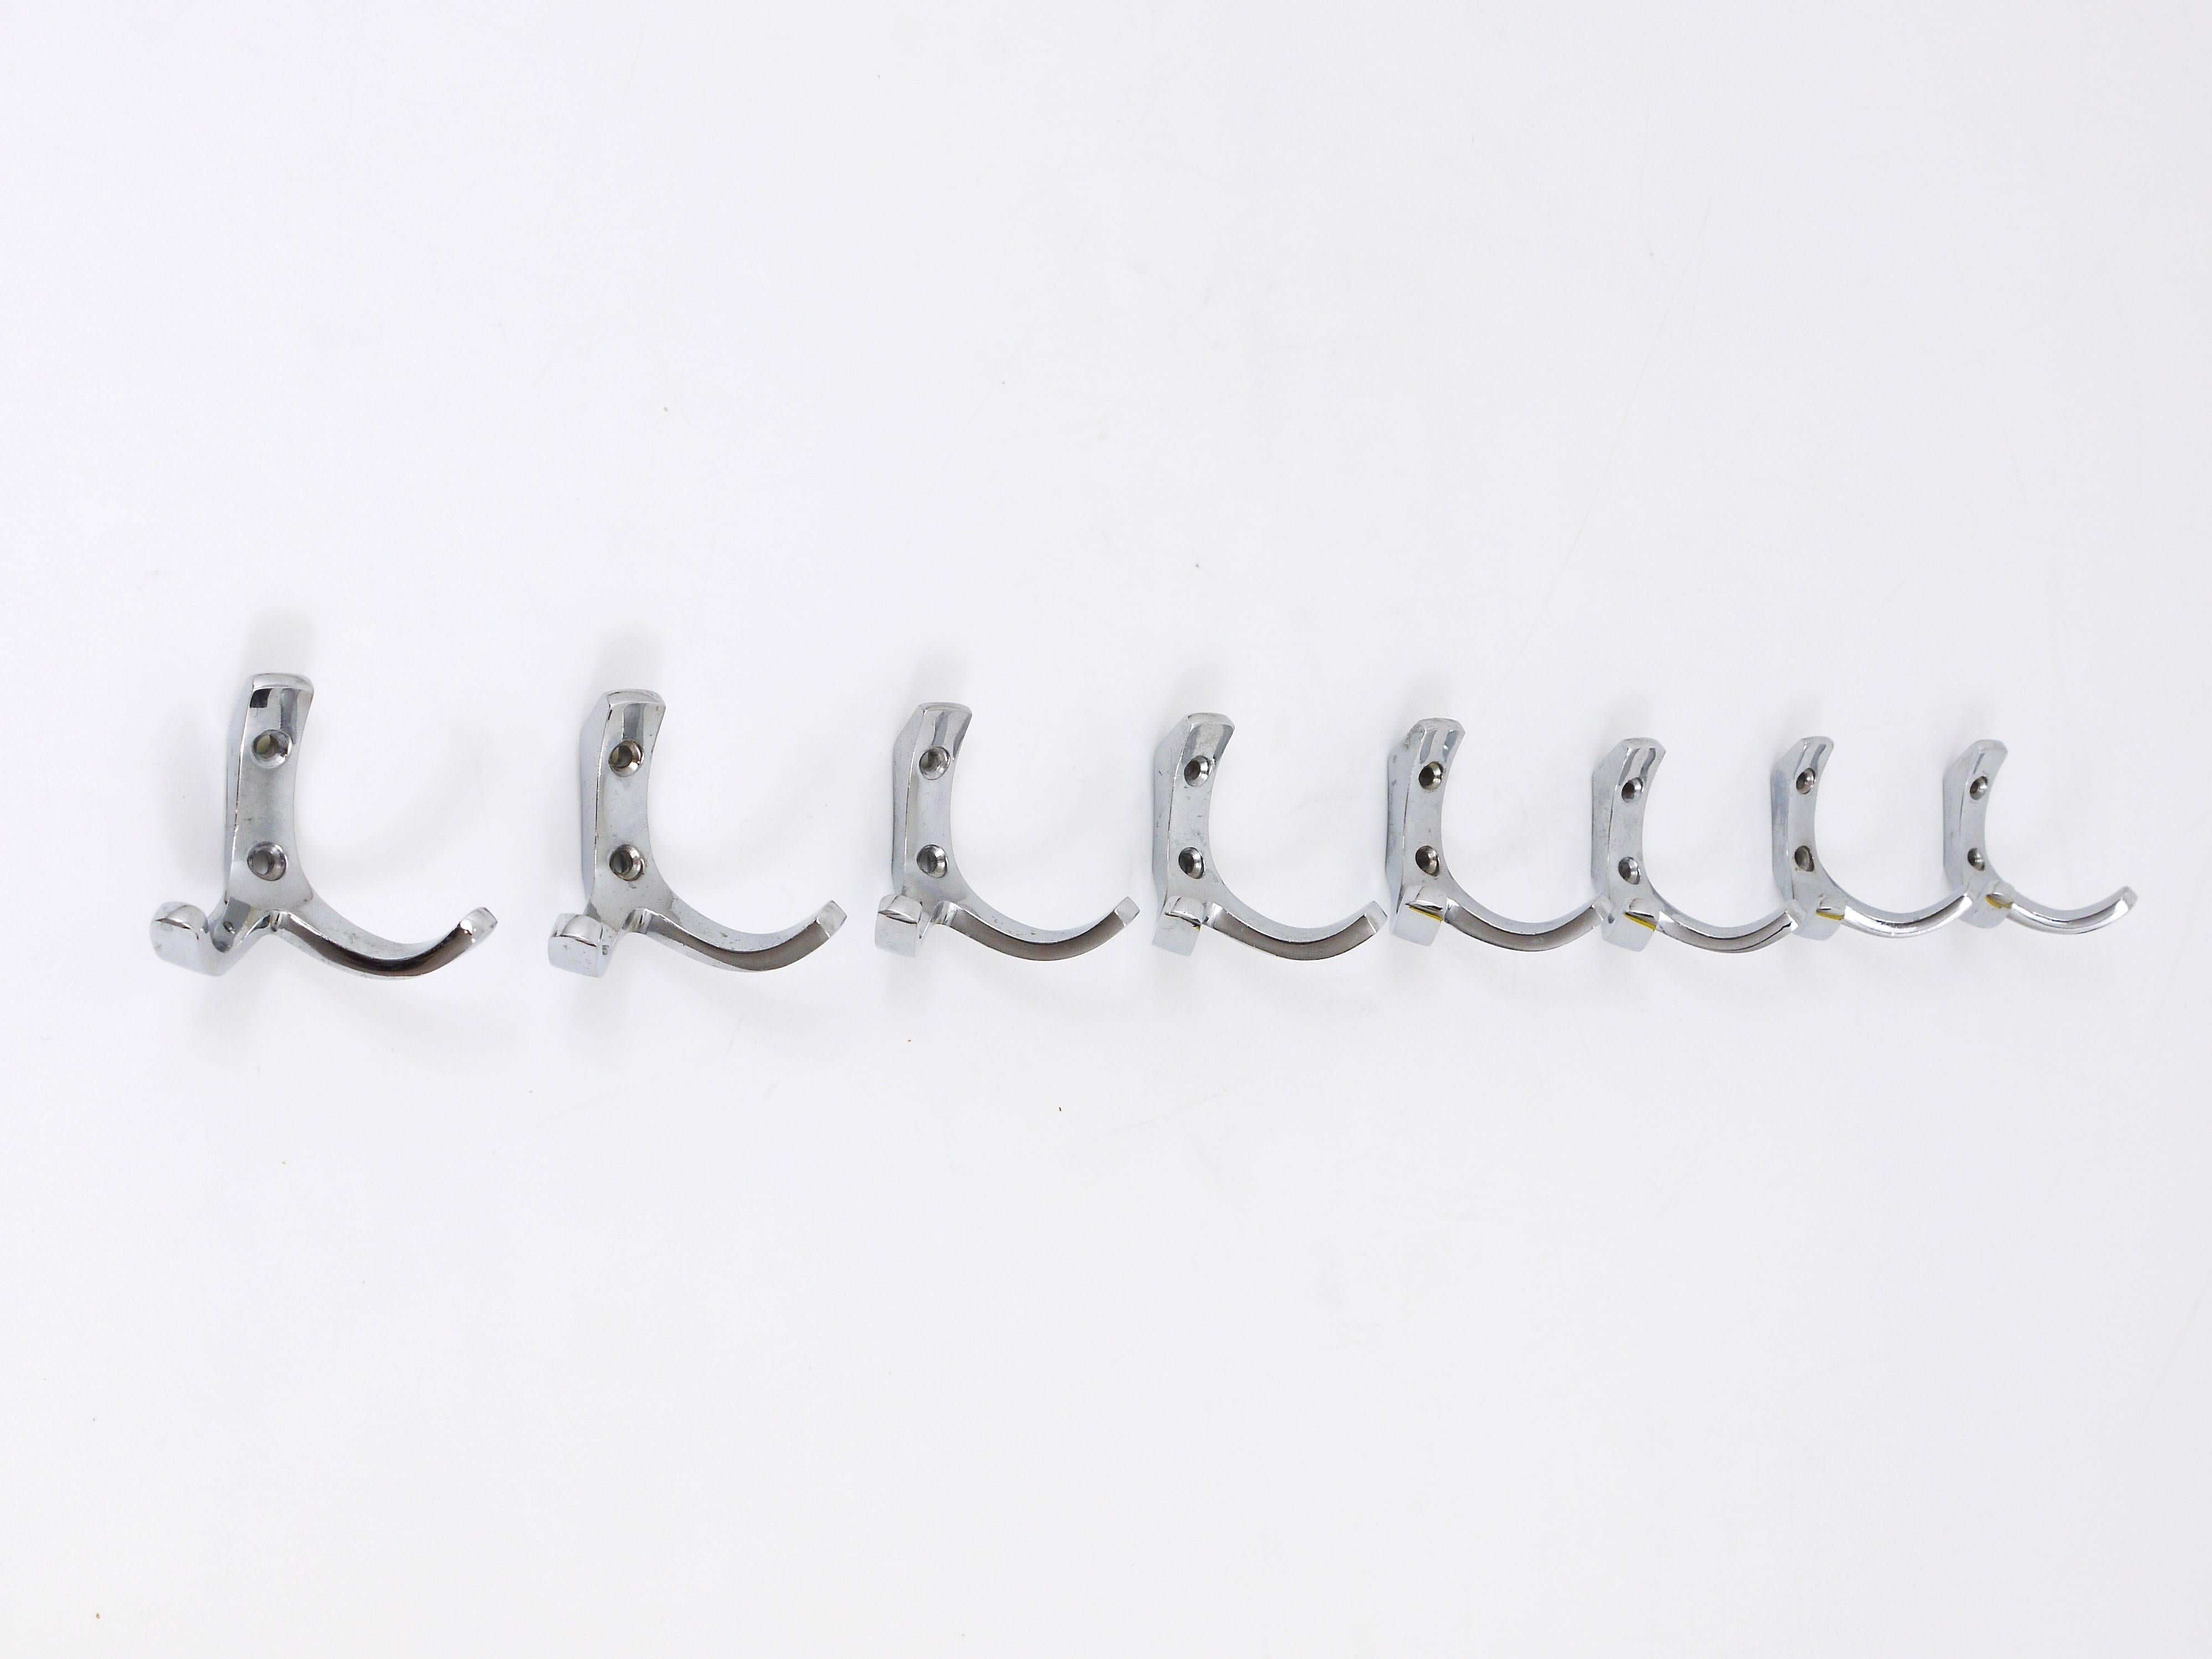 Up to four Austrian Mid-Century coat hooks, executed in the 1950s by Hertha Baller, Austria. Made of chrome-plated brass in very good condition with nice patina. Four hooks available, can be sold separately, the price is per piece. 

We offer many